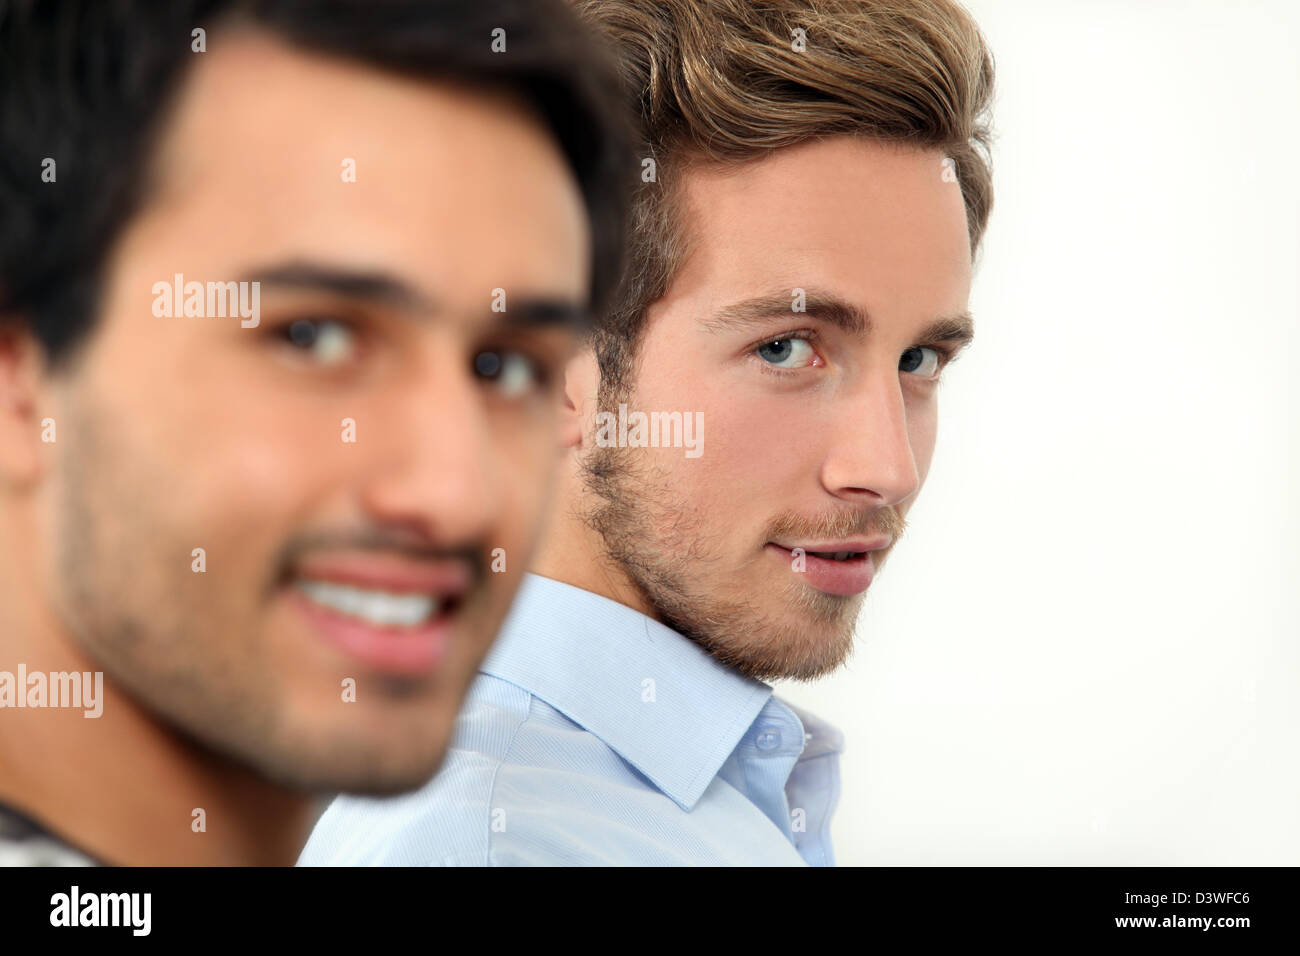 Portrait of two young people Stock Photo